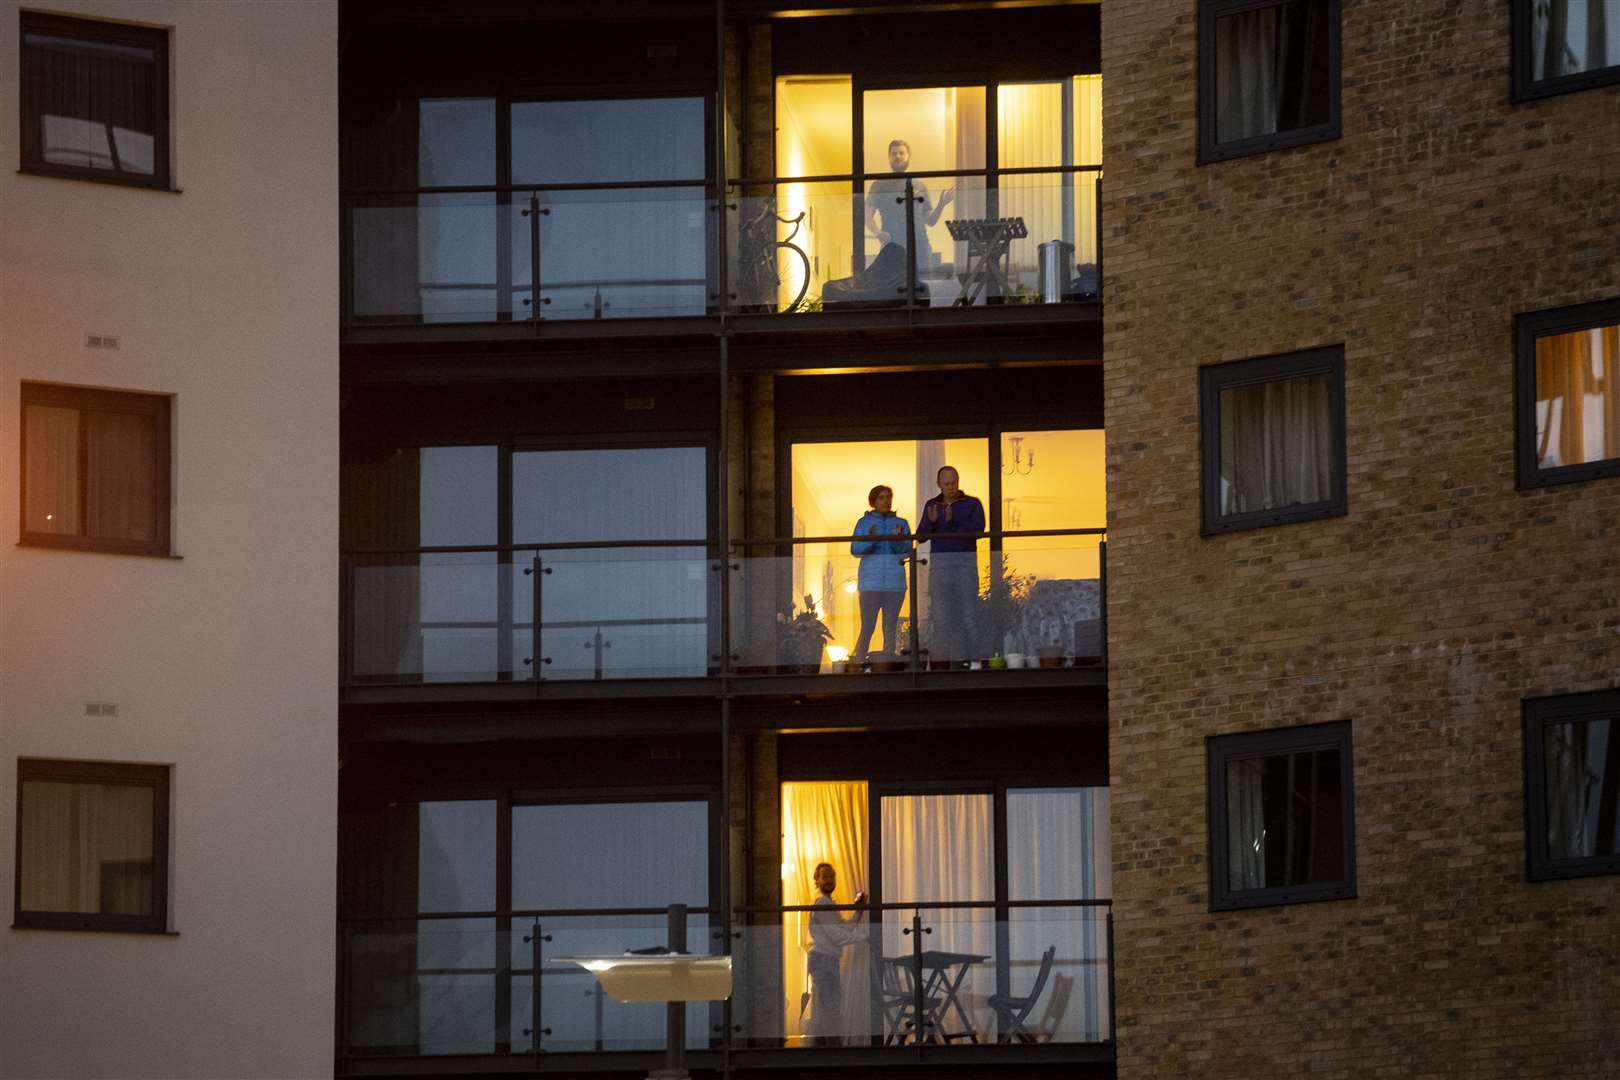 Members of the public clap on their balconies in Canary Wharf, to salute NHS staff (Victoria Jones/PA)